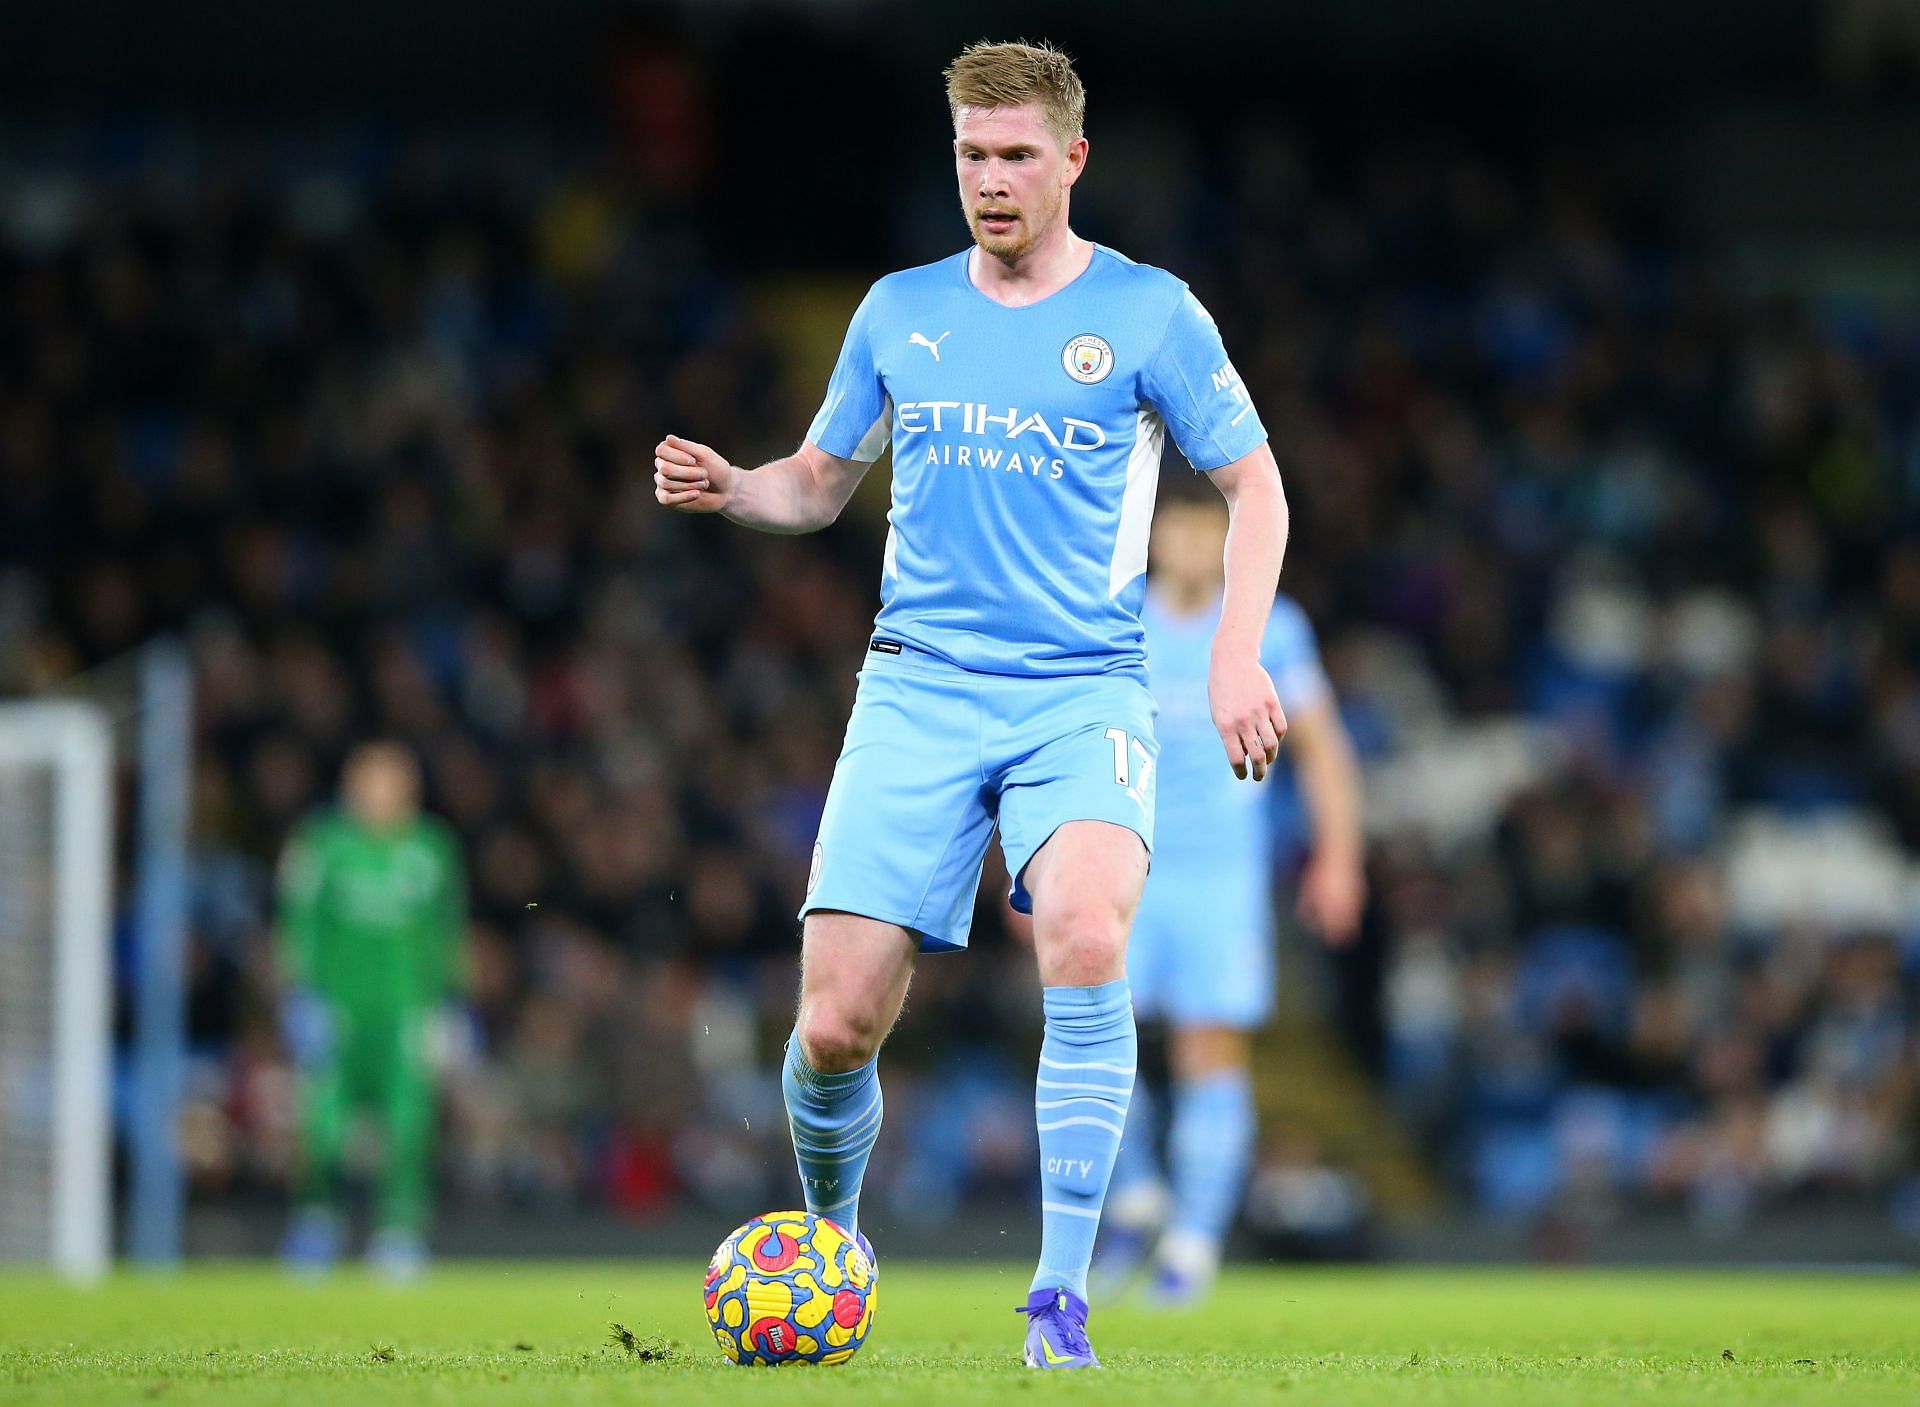 Kevin De Bruyne was one of many Belgians to win a league title in 2021.